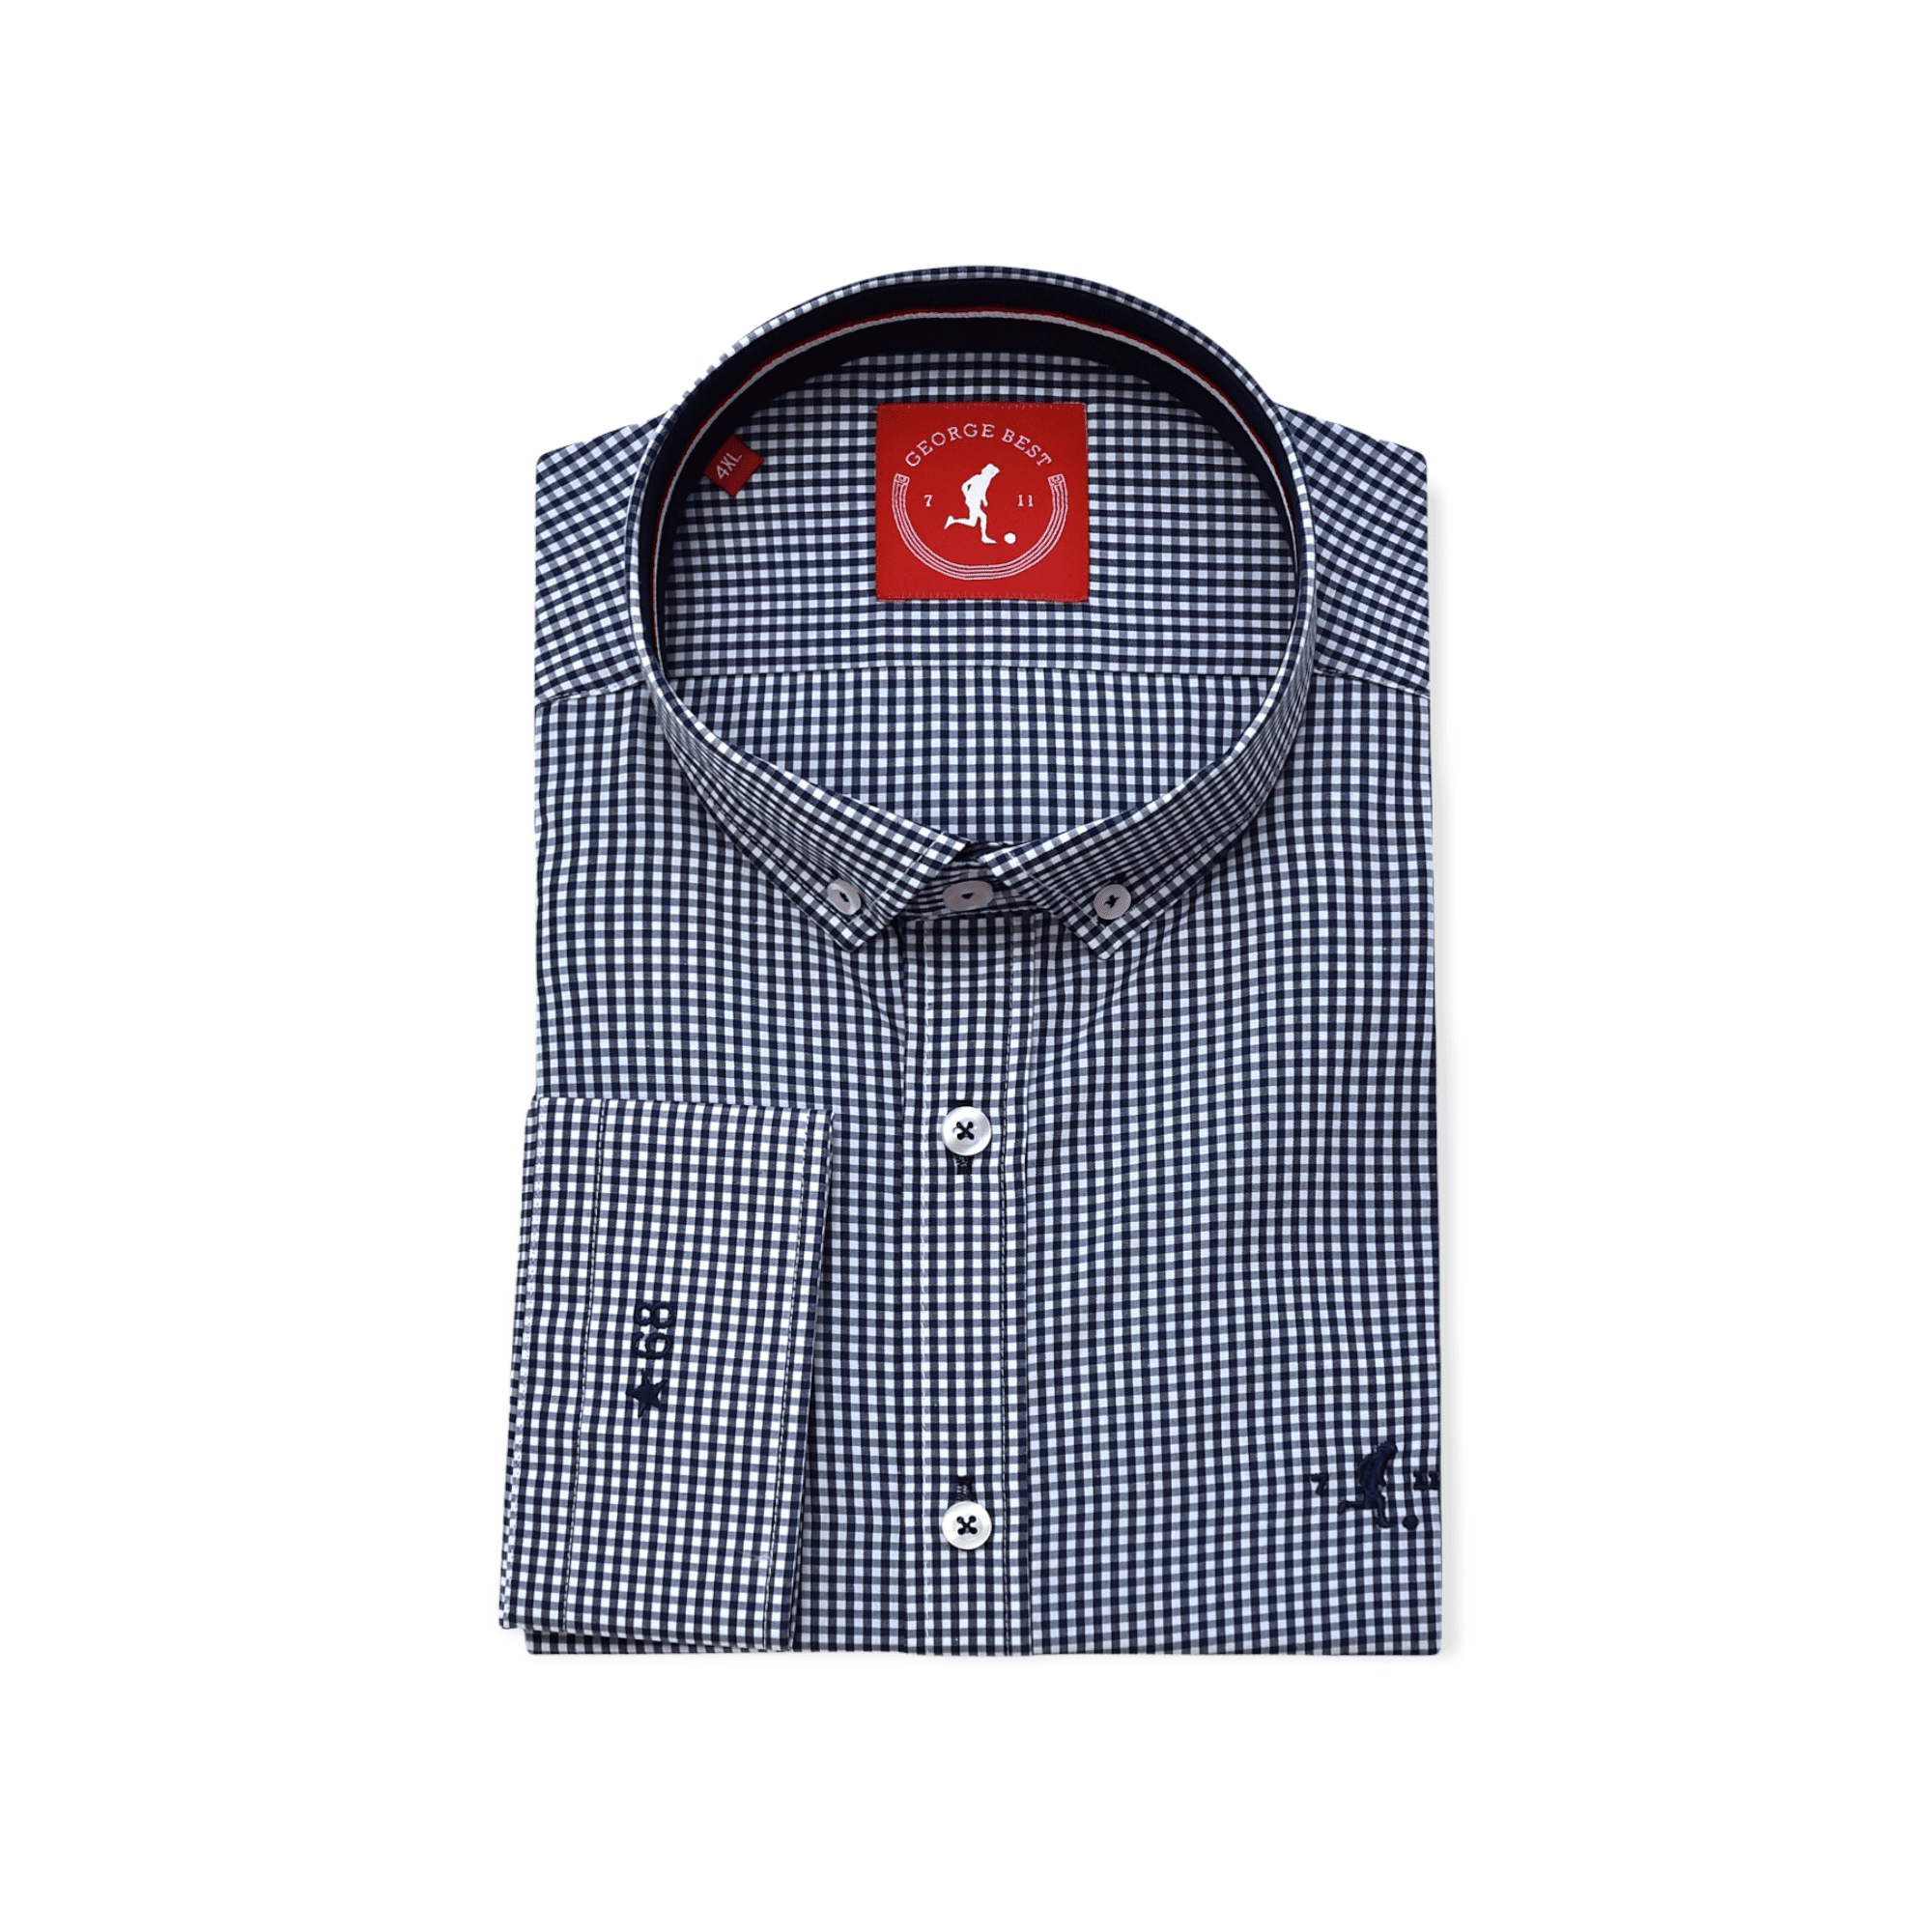 Navy Gingham Check Shirt With Button Down Collar